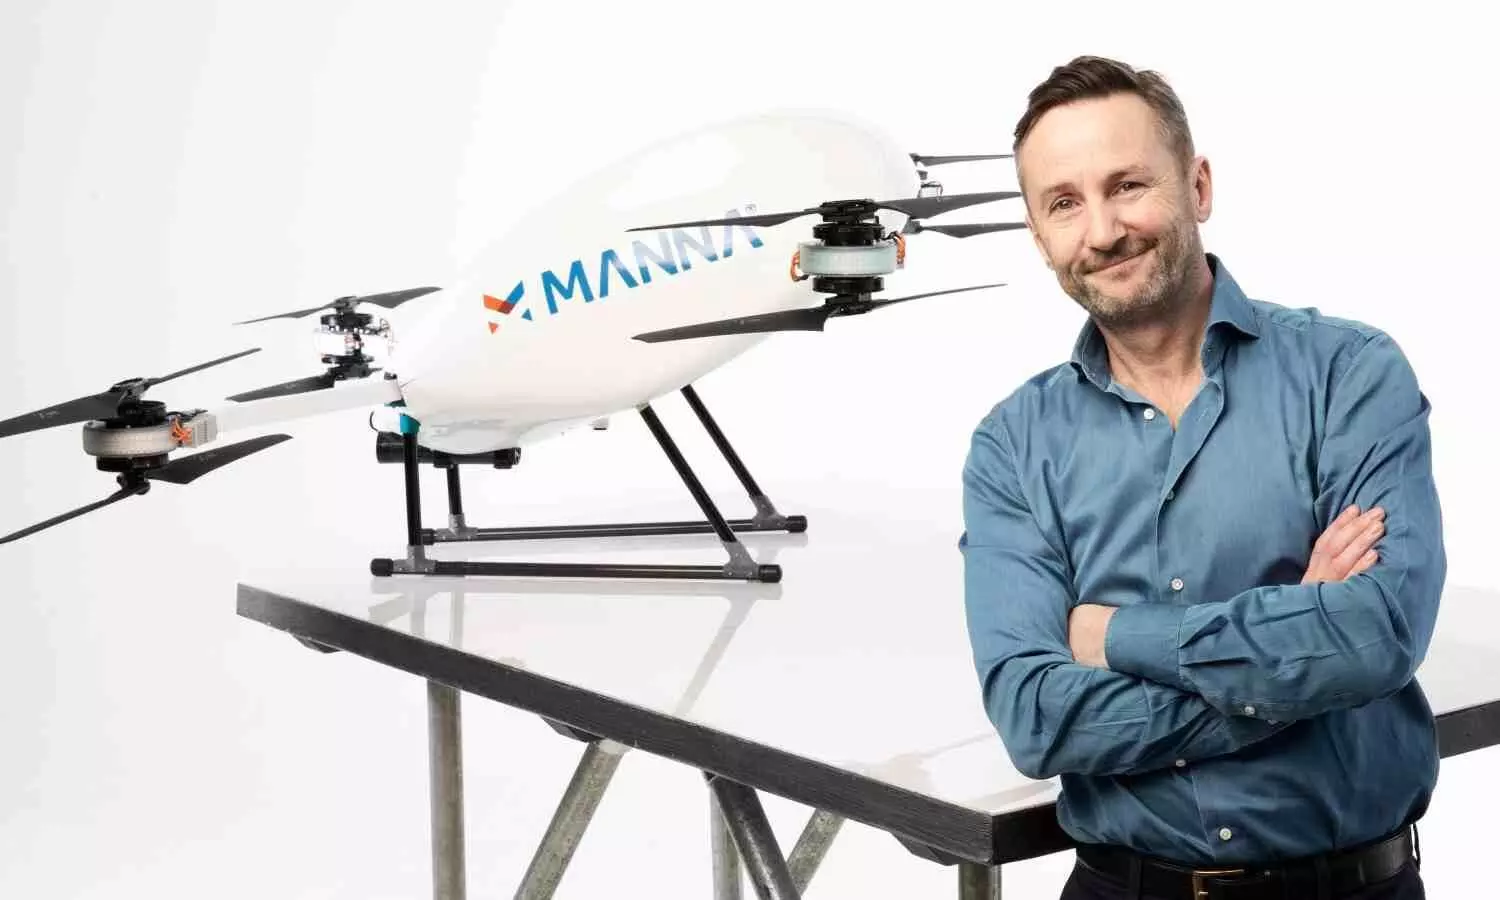 Bobby Healy, Founder and CEO, Manna Drone Delivery